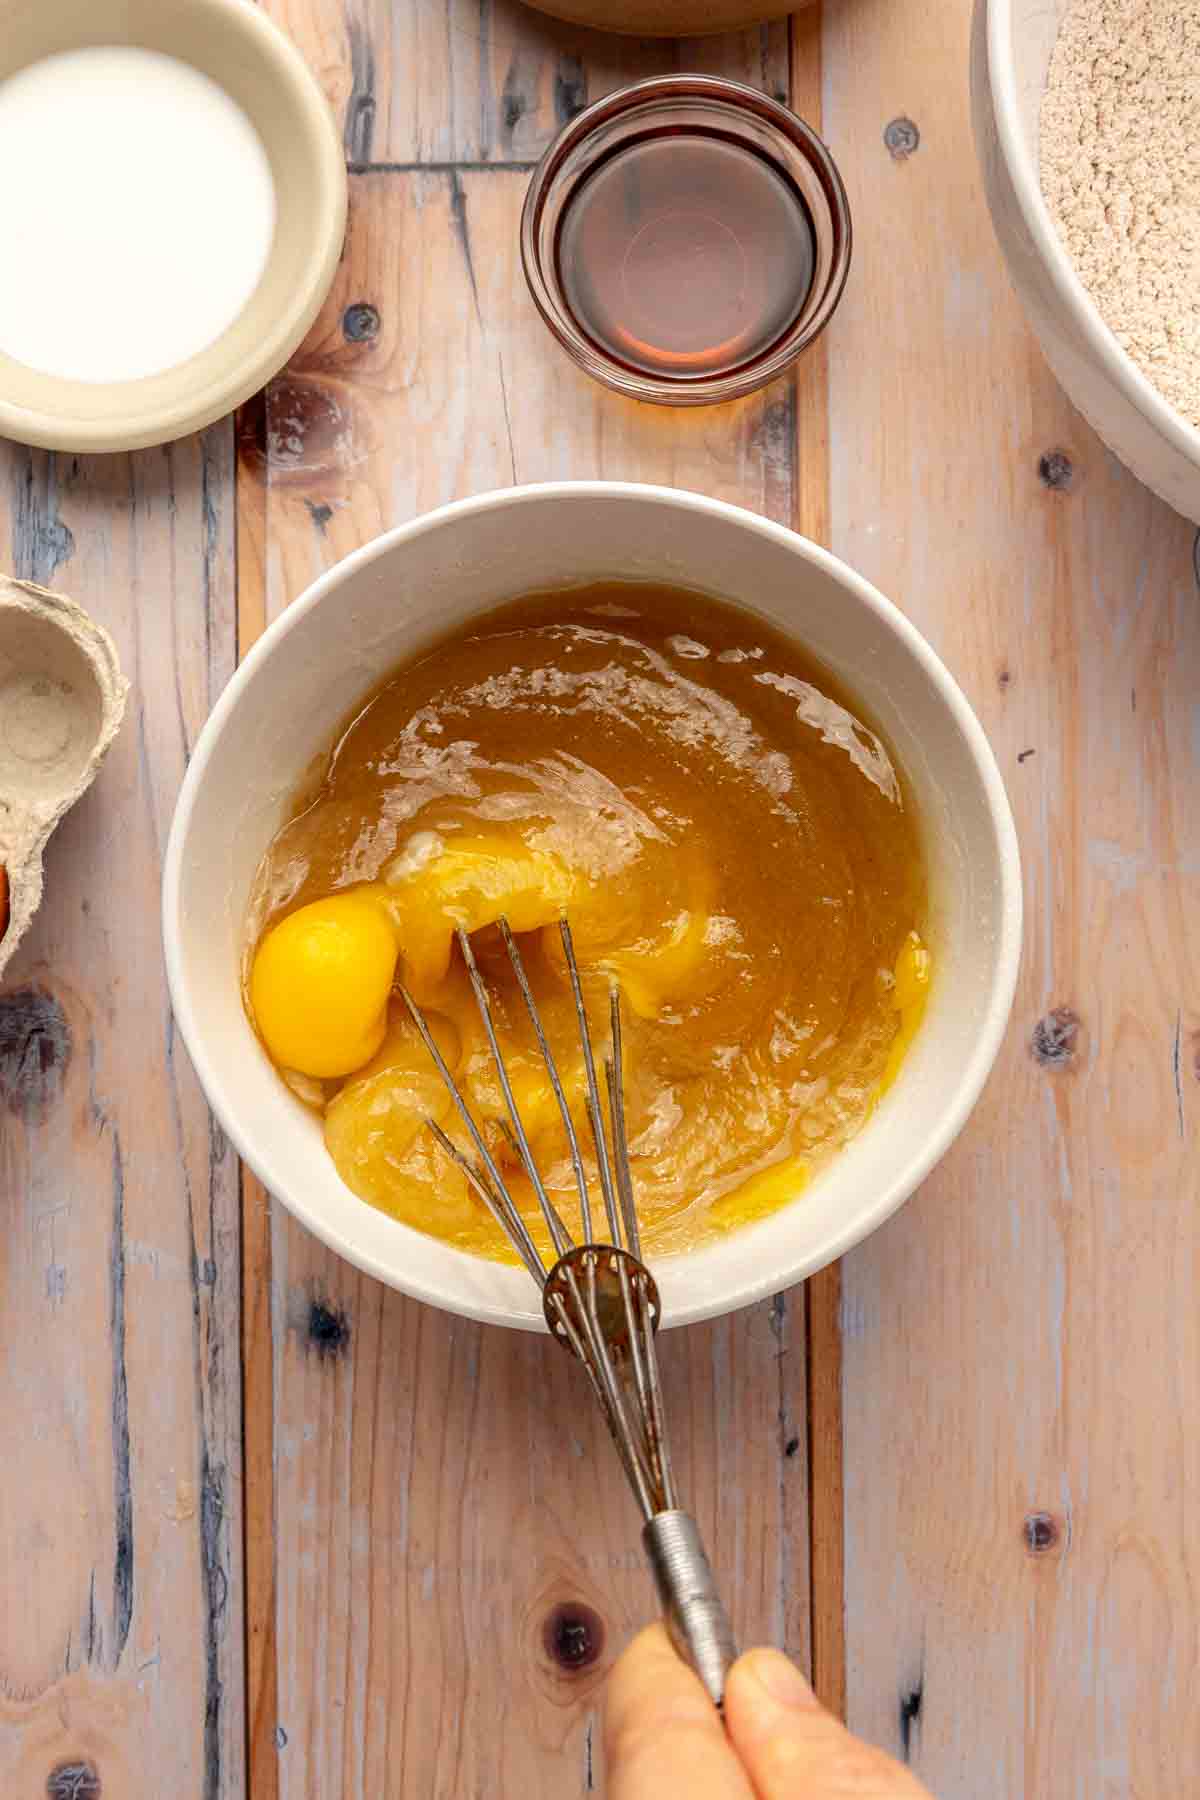 Whisking eggs with vanilla, oil, applesauce and sugar.